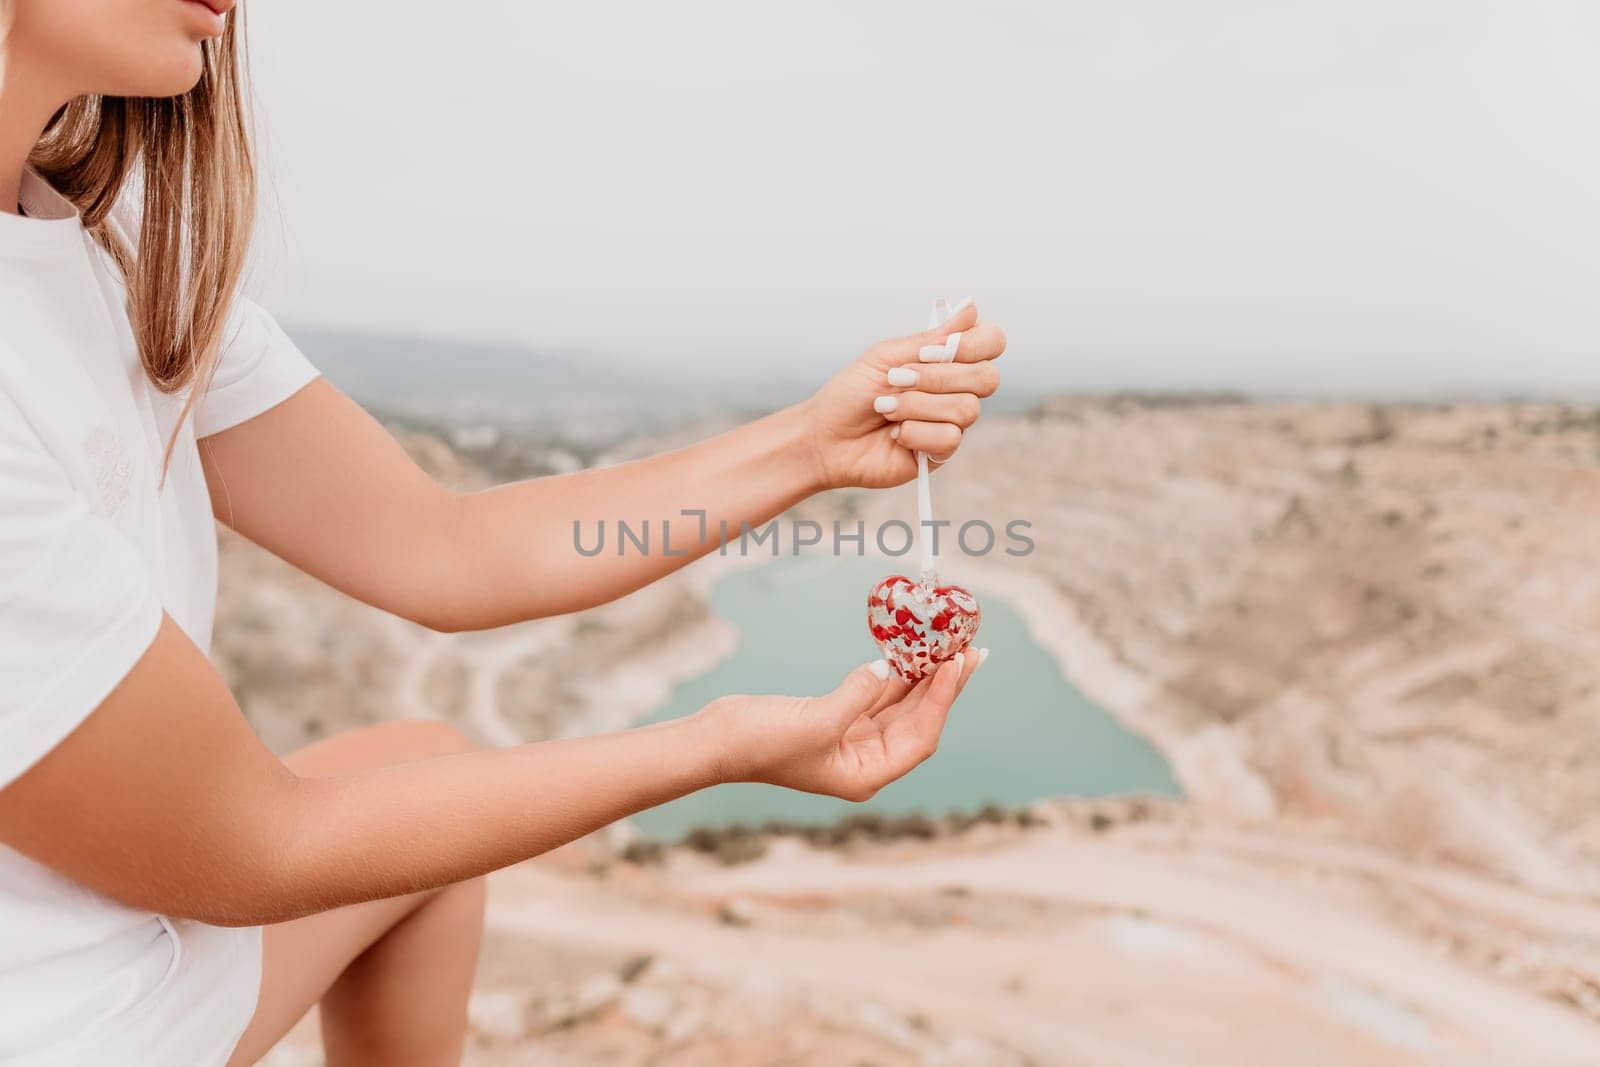 Woman travel portrait. Happy woman with long hair looking at camera and smiling. Close up portrait cute woman is posing on a heart shaped lake - travel destination by panophotograph